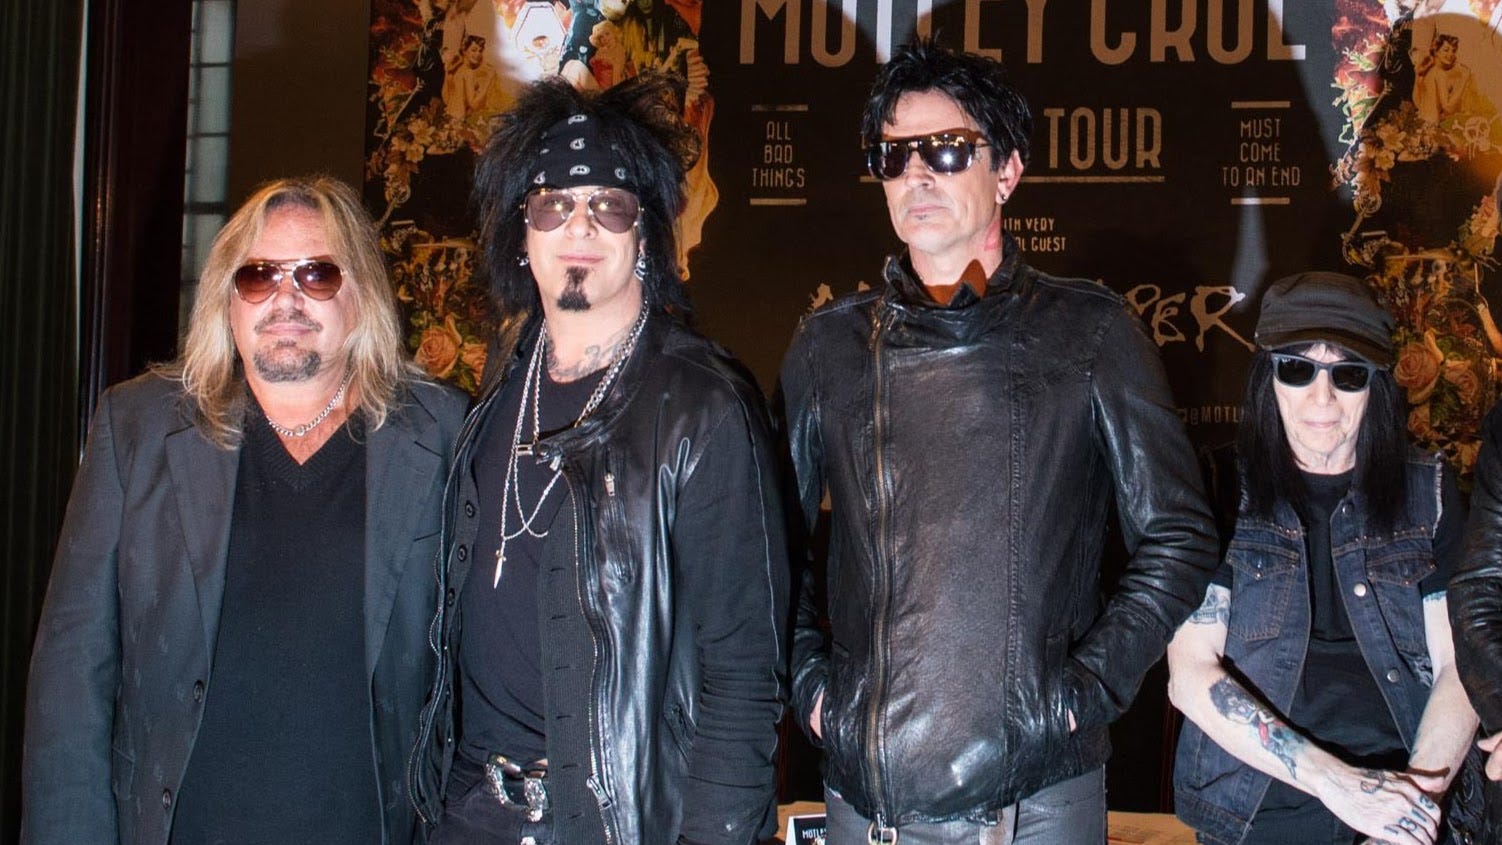 10 weird-but-true Indiana tales of Motley Crue as band returns to road